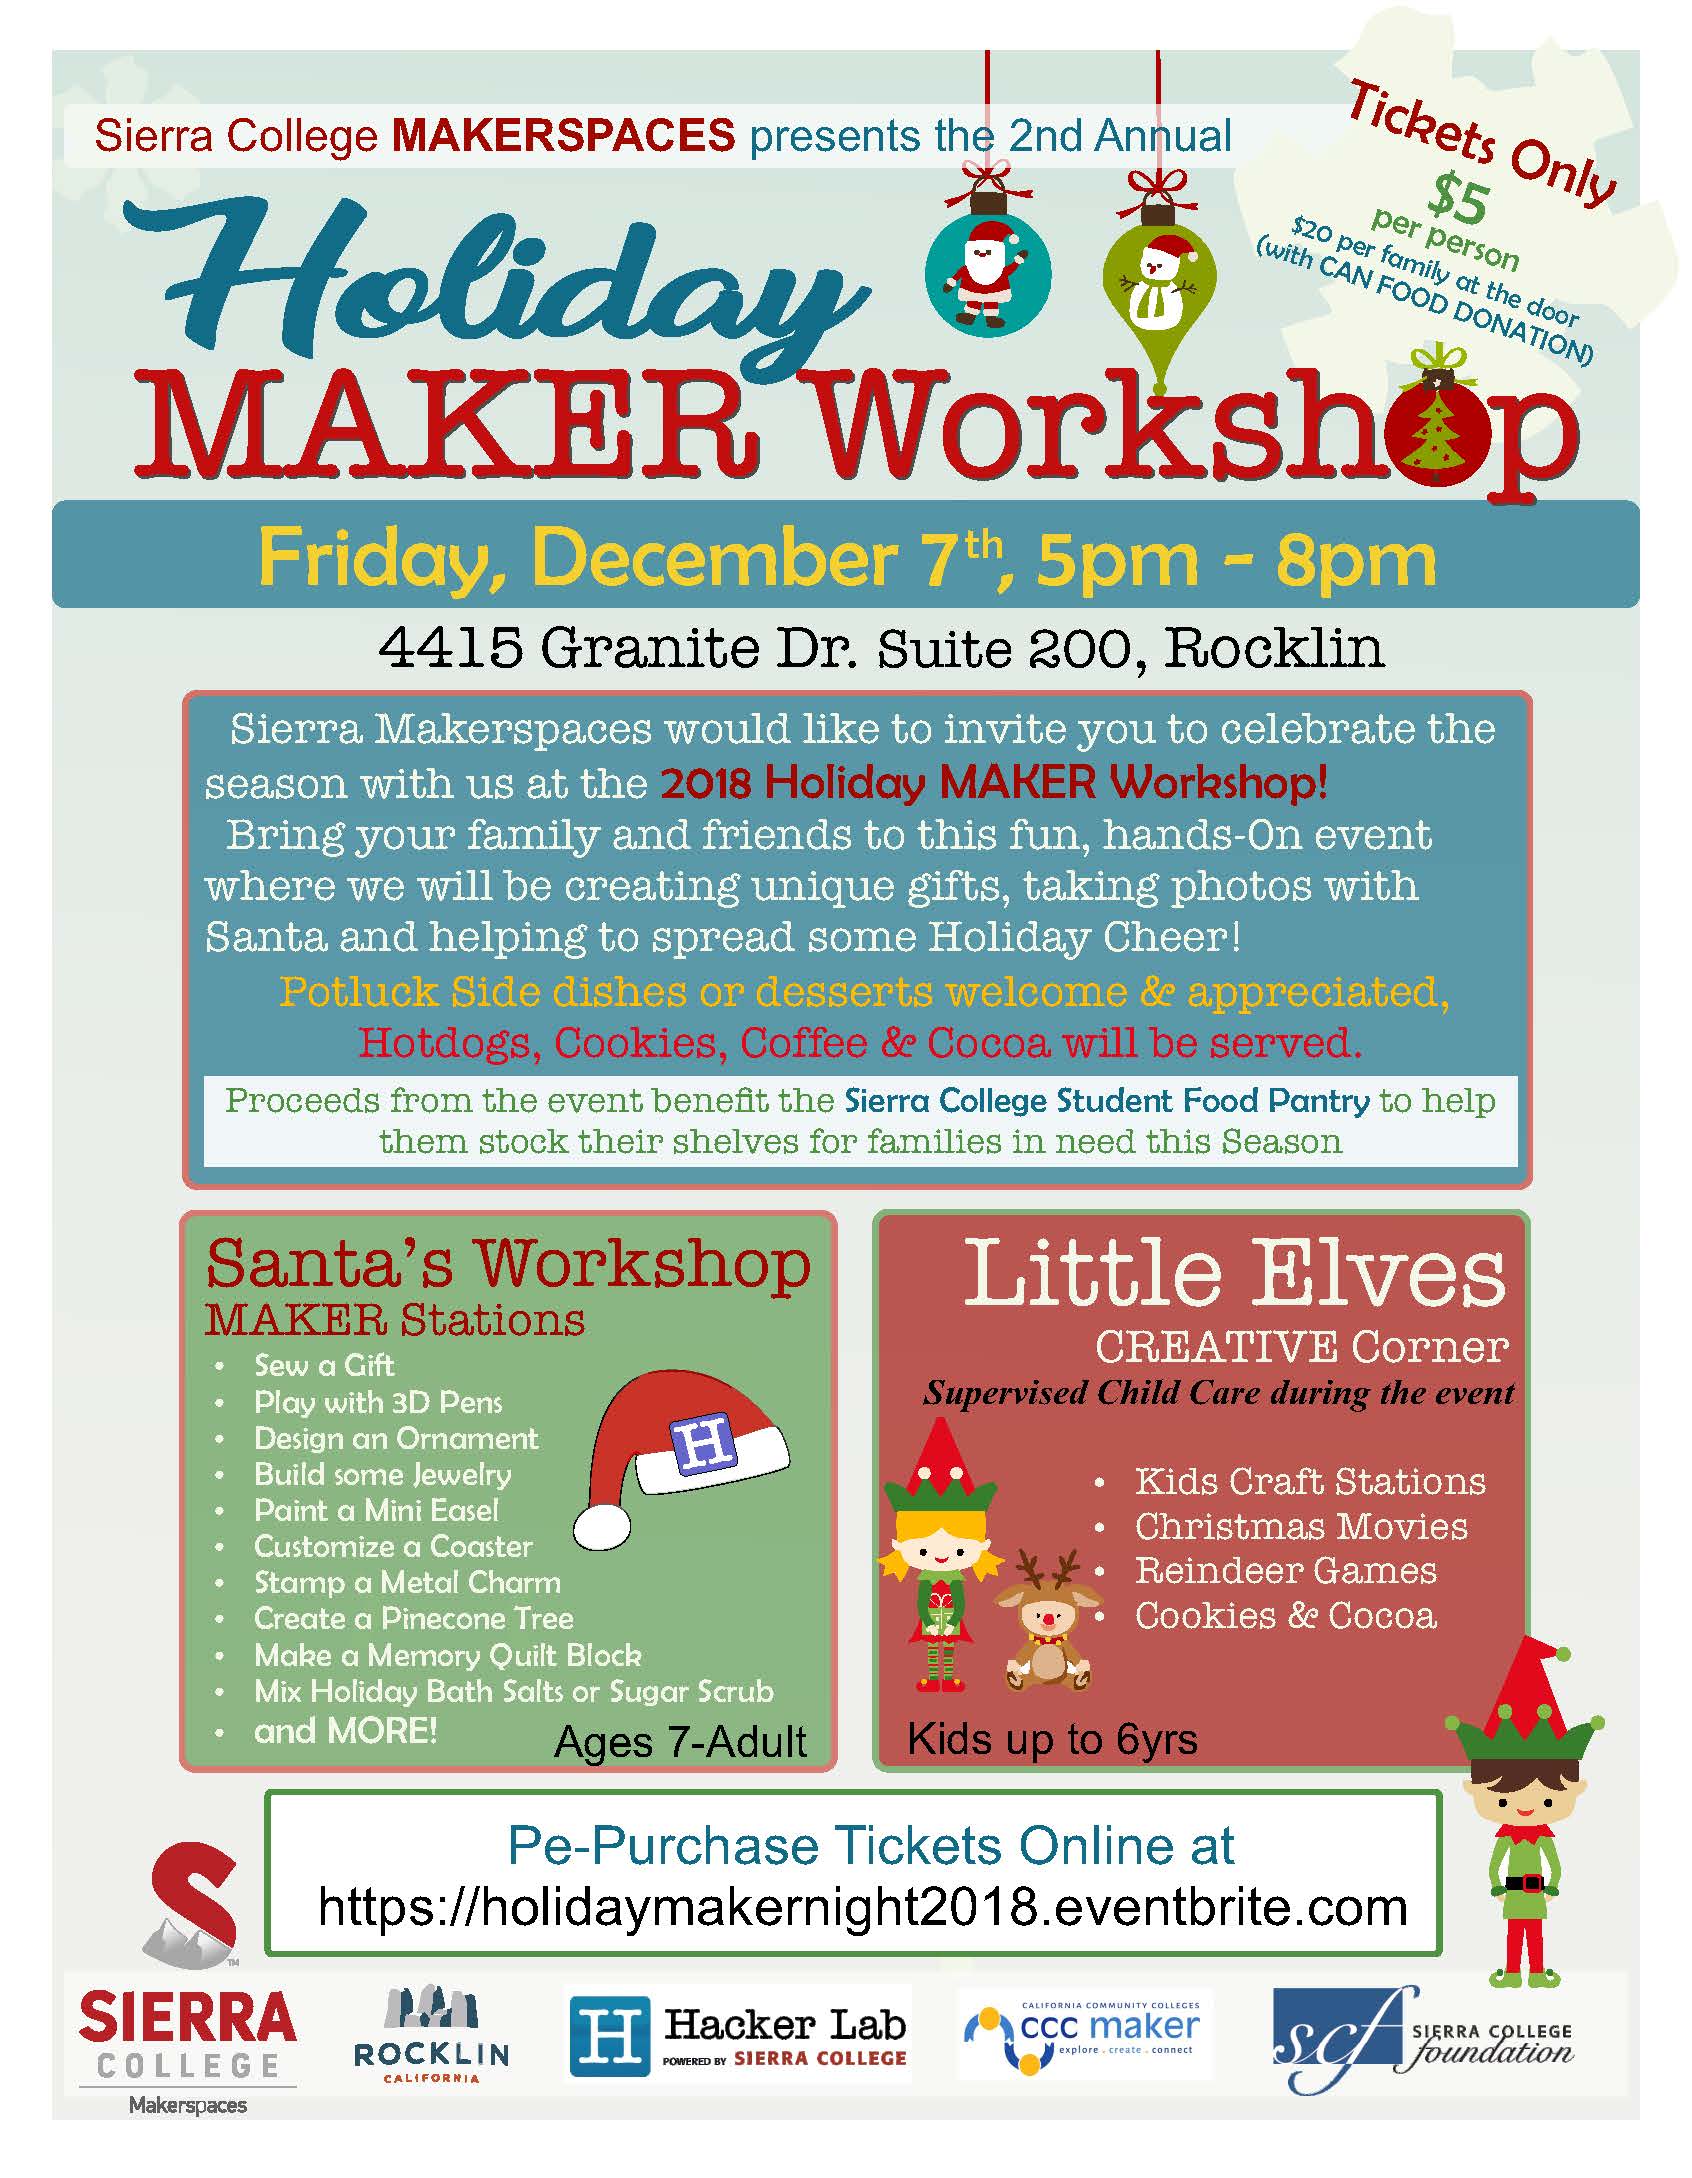 Sierra College Makerspaces invites families to Holiday Maker Workshop on Friday, December 7 at Hacker Lab powered by Sierra College in Rocklin to support the Student Food Pantry.